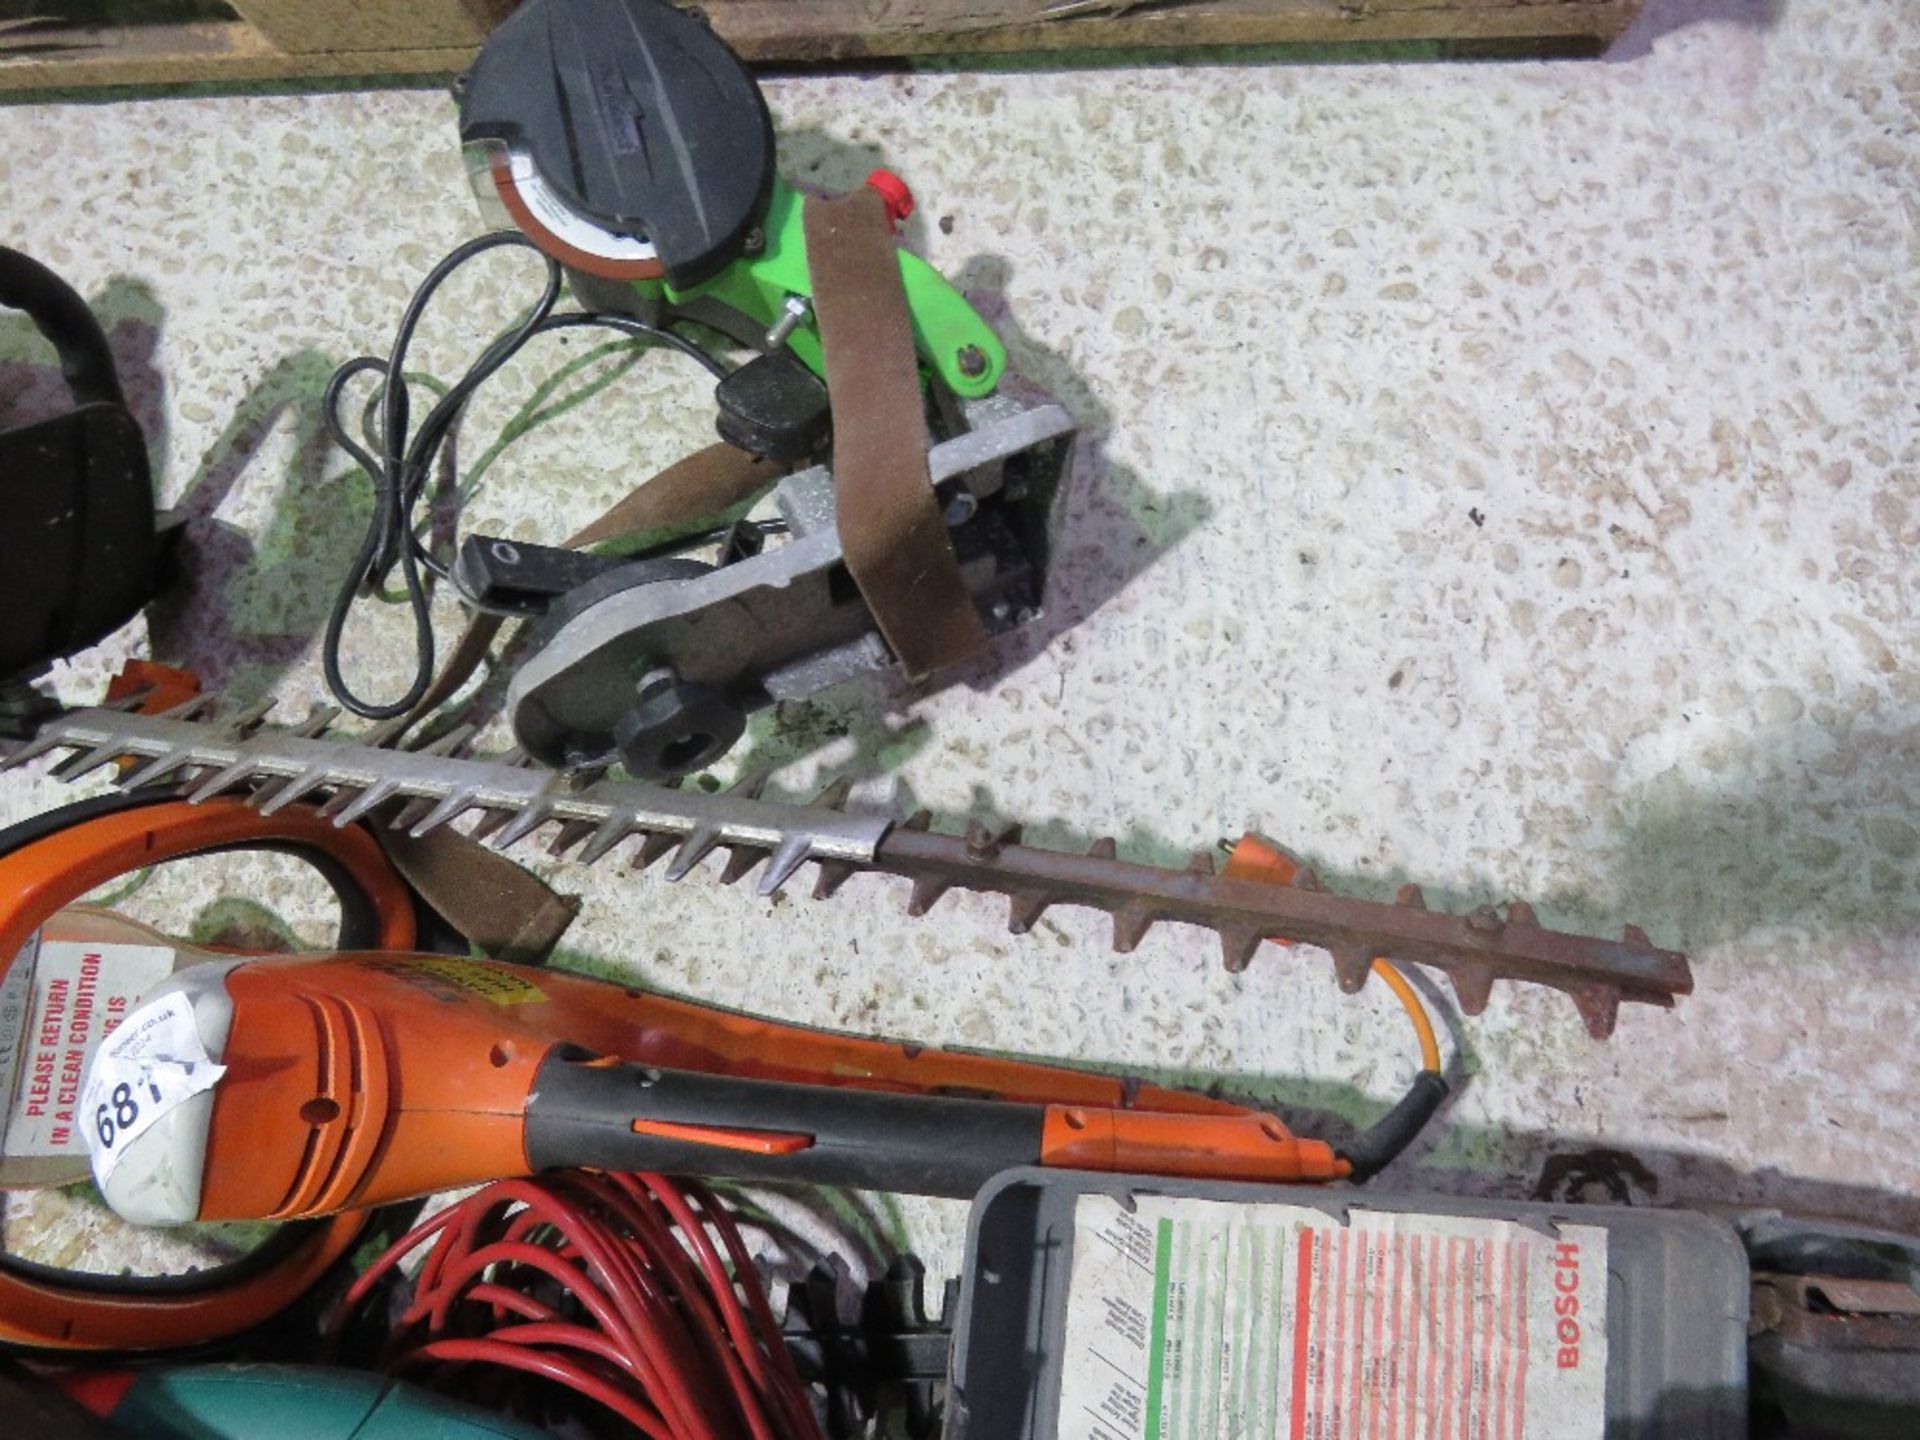 2 X PETROL HEDGE CUTTERS PLUS 2 X ELECTRIC HEDGE CUTTERS AND A CHAINSAW SHARPENER. - Image 6 of 14